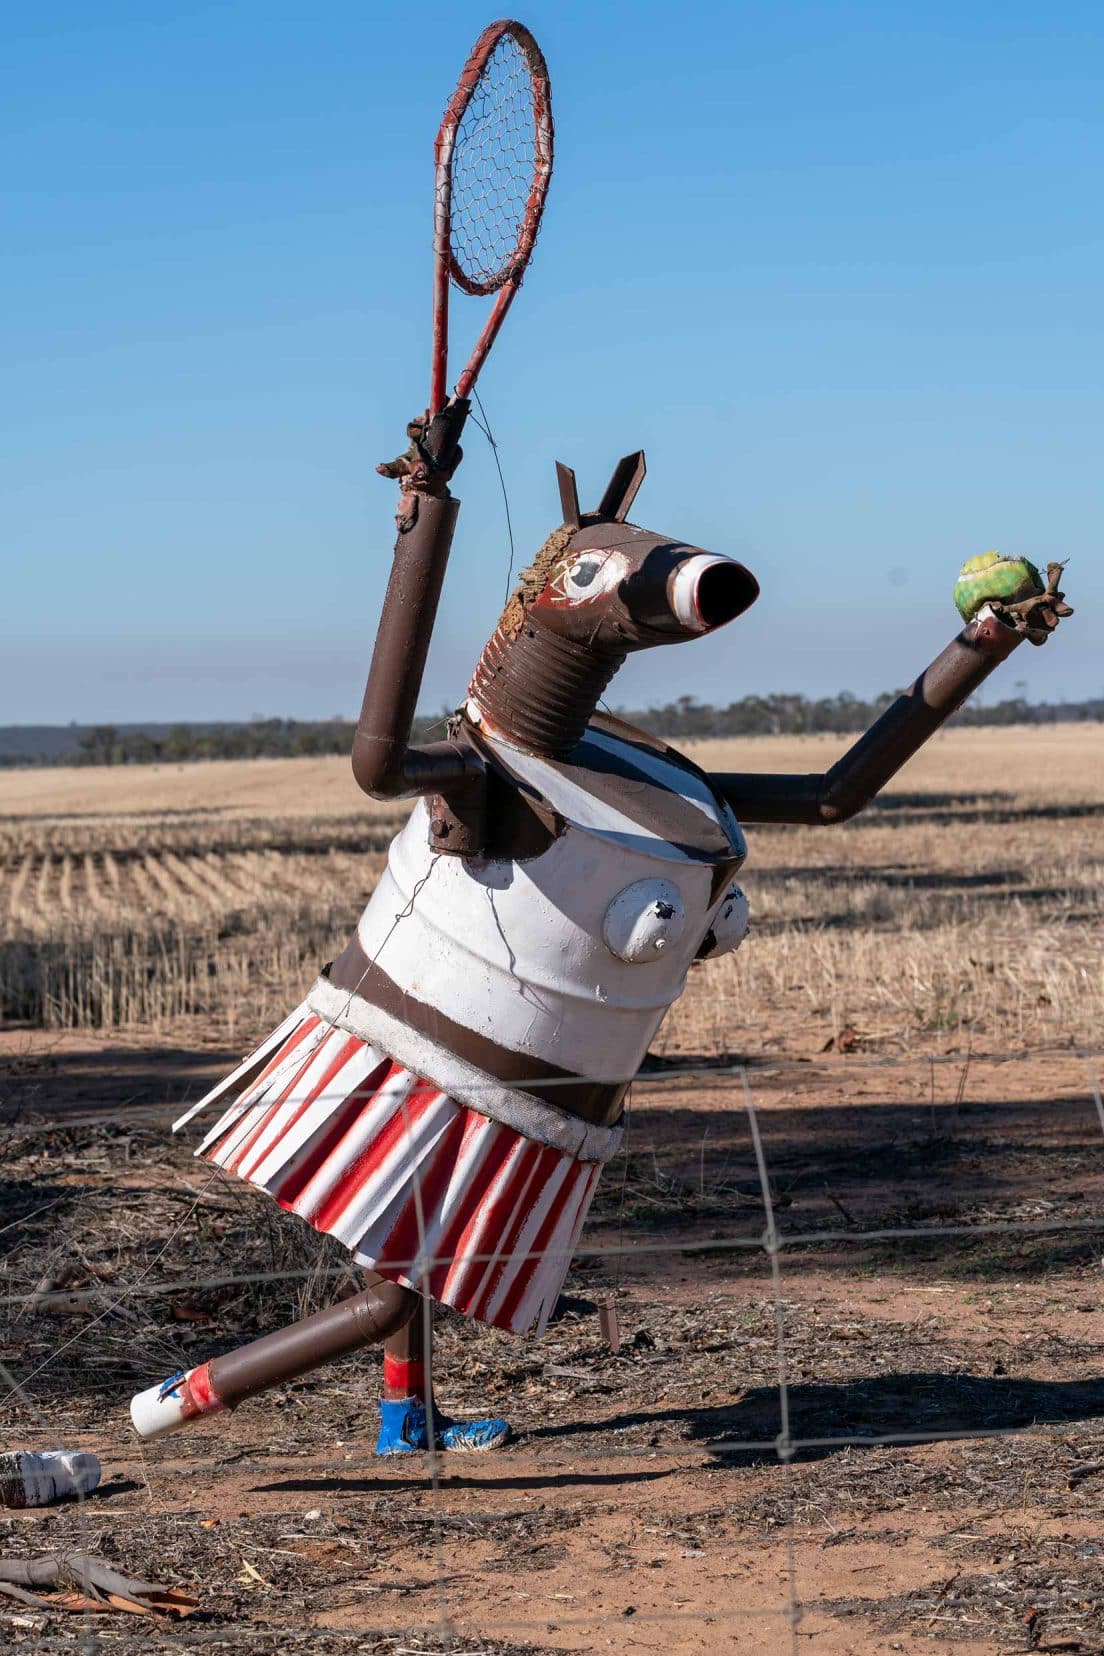 Tin horse in tennis gear with raquet and ball